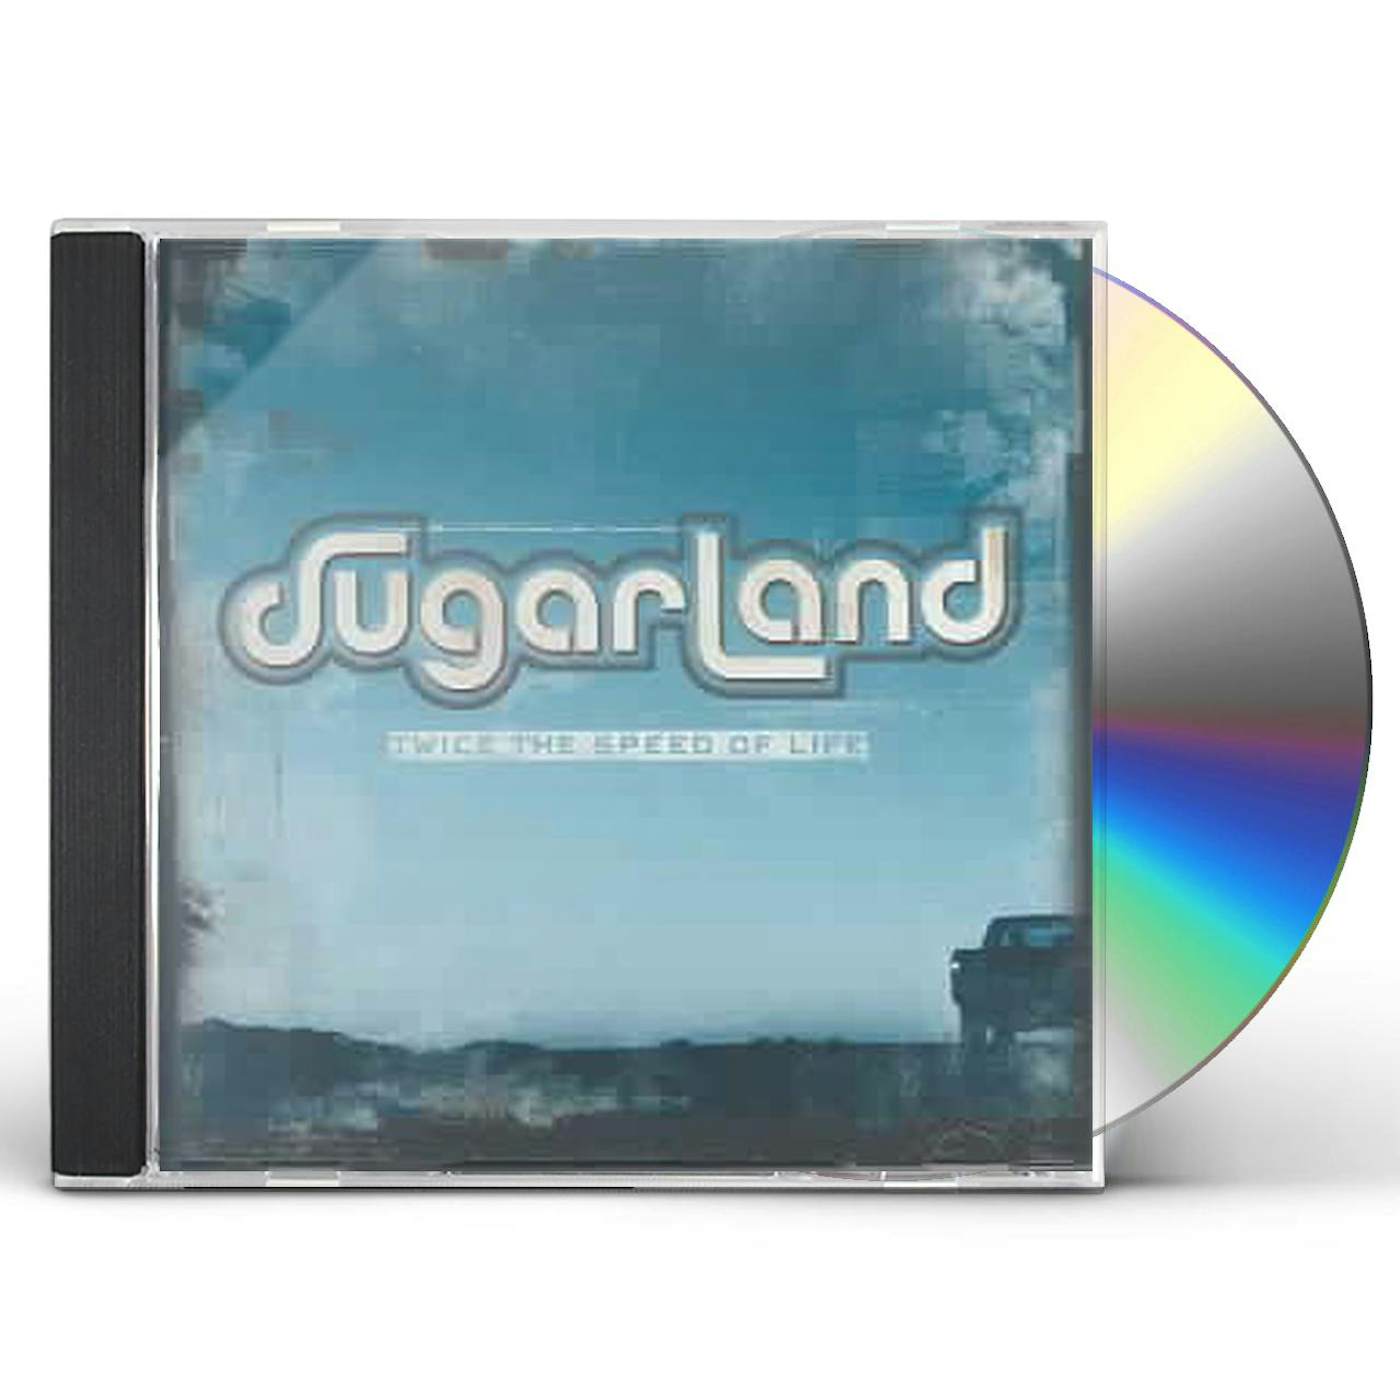 Sugarland TWICE THE SPEED OF LIFE CD